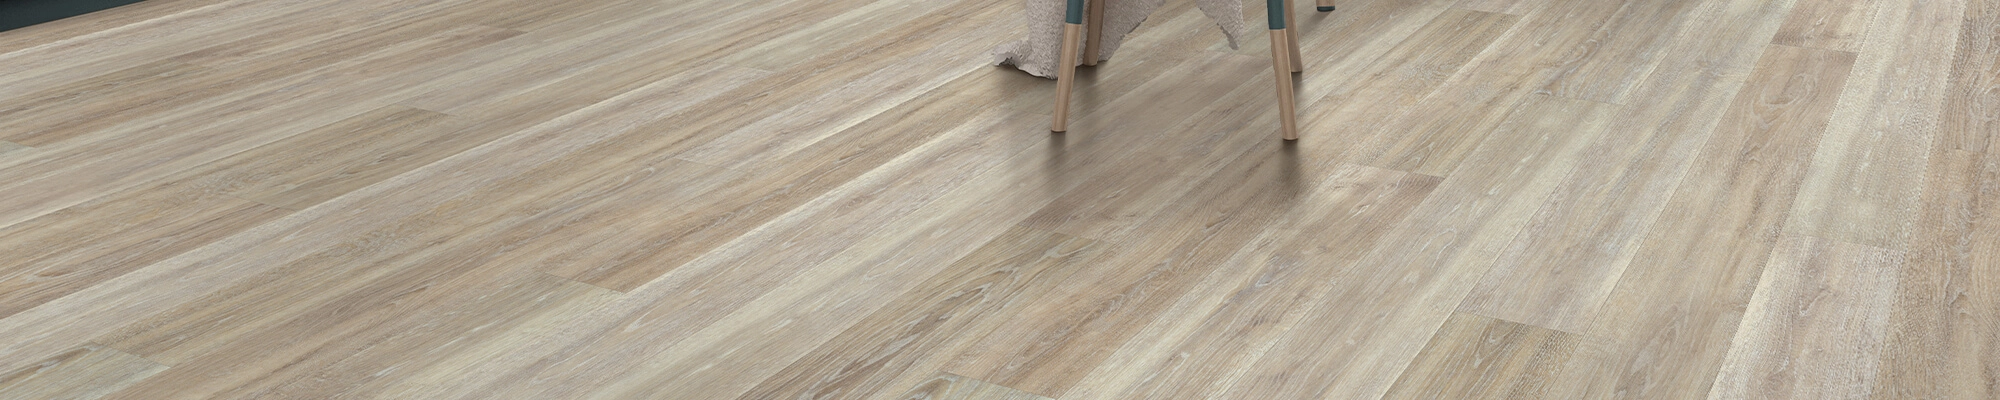 Local Flooring Retailer in Roswell